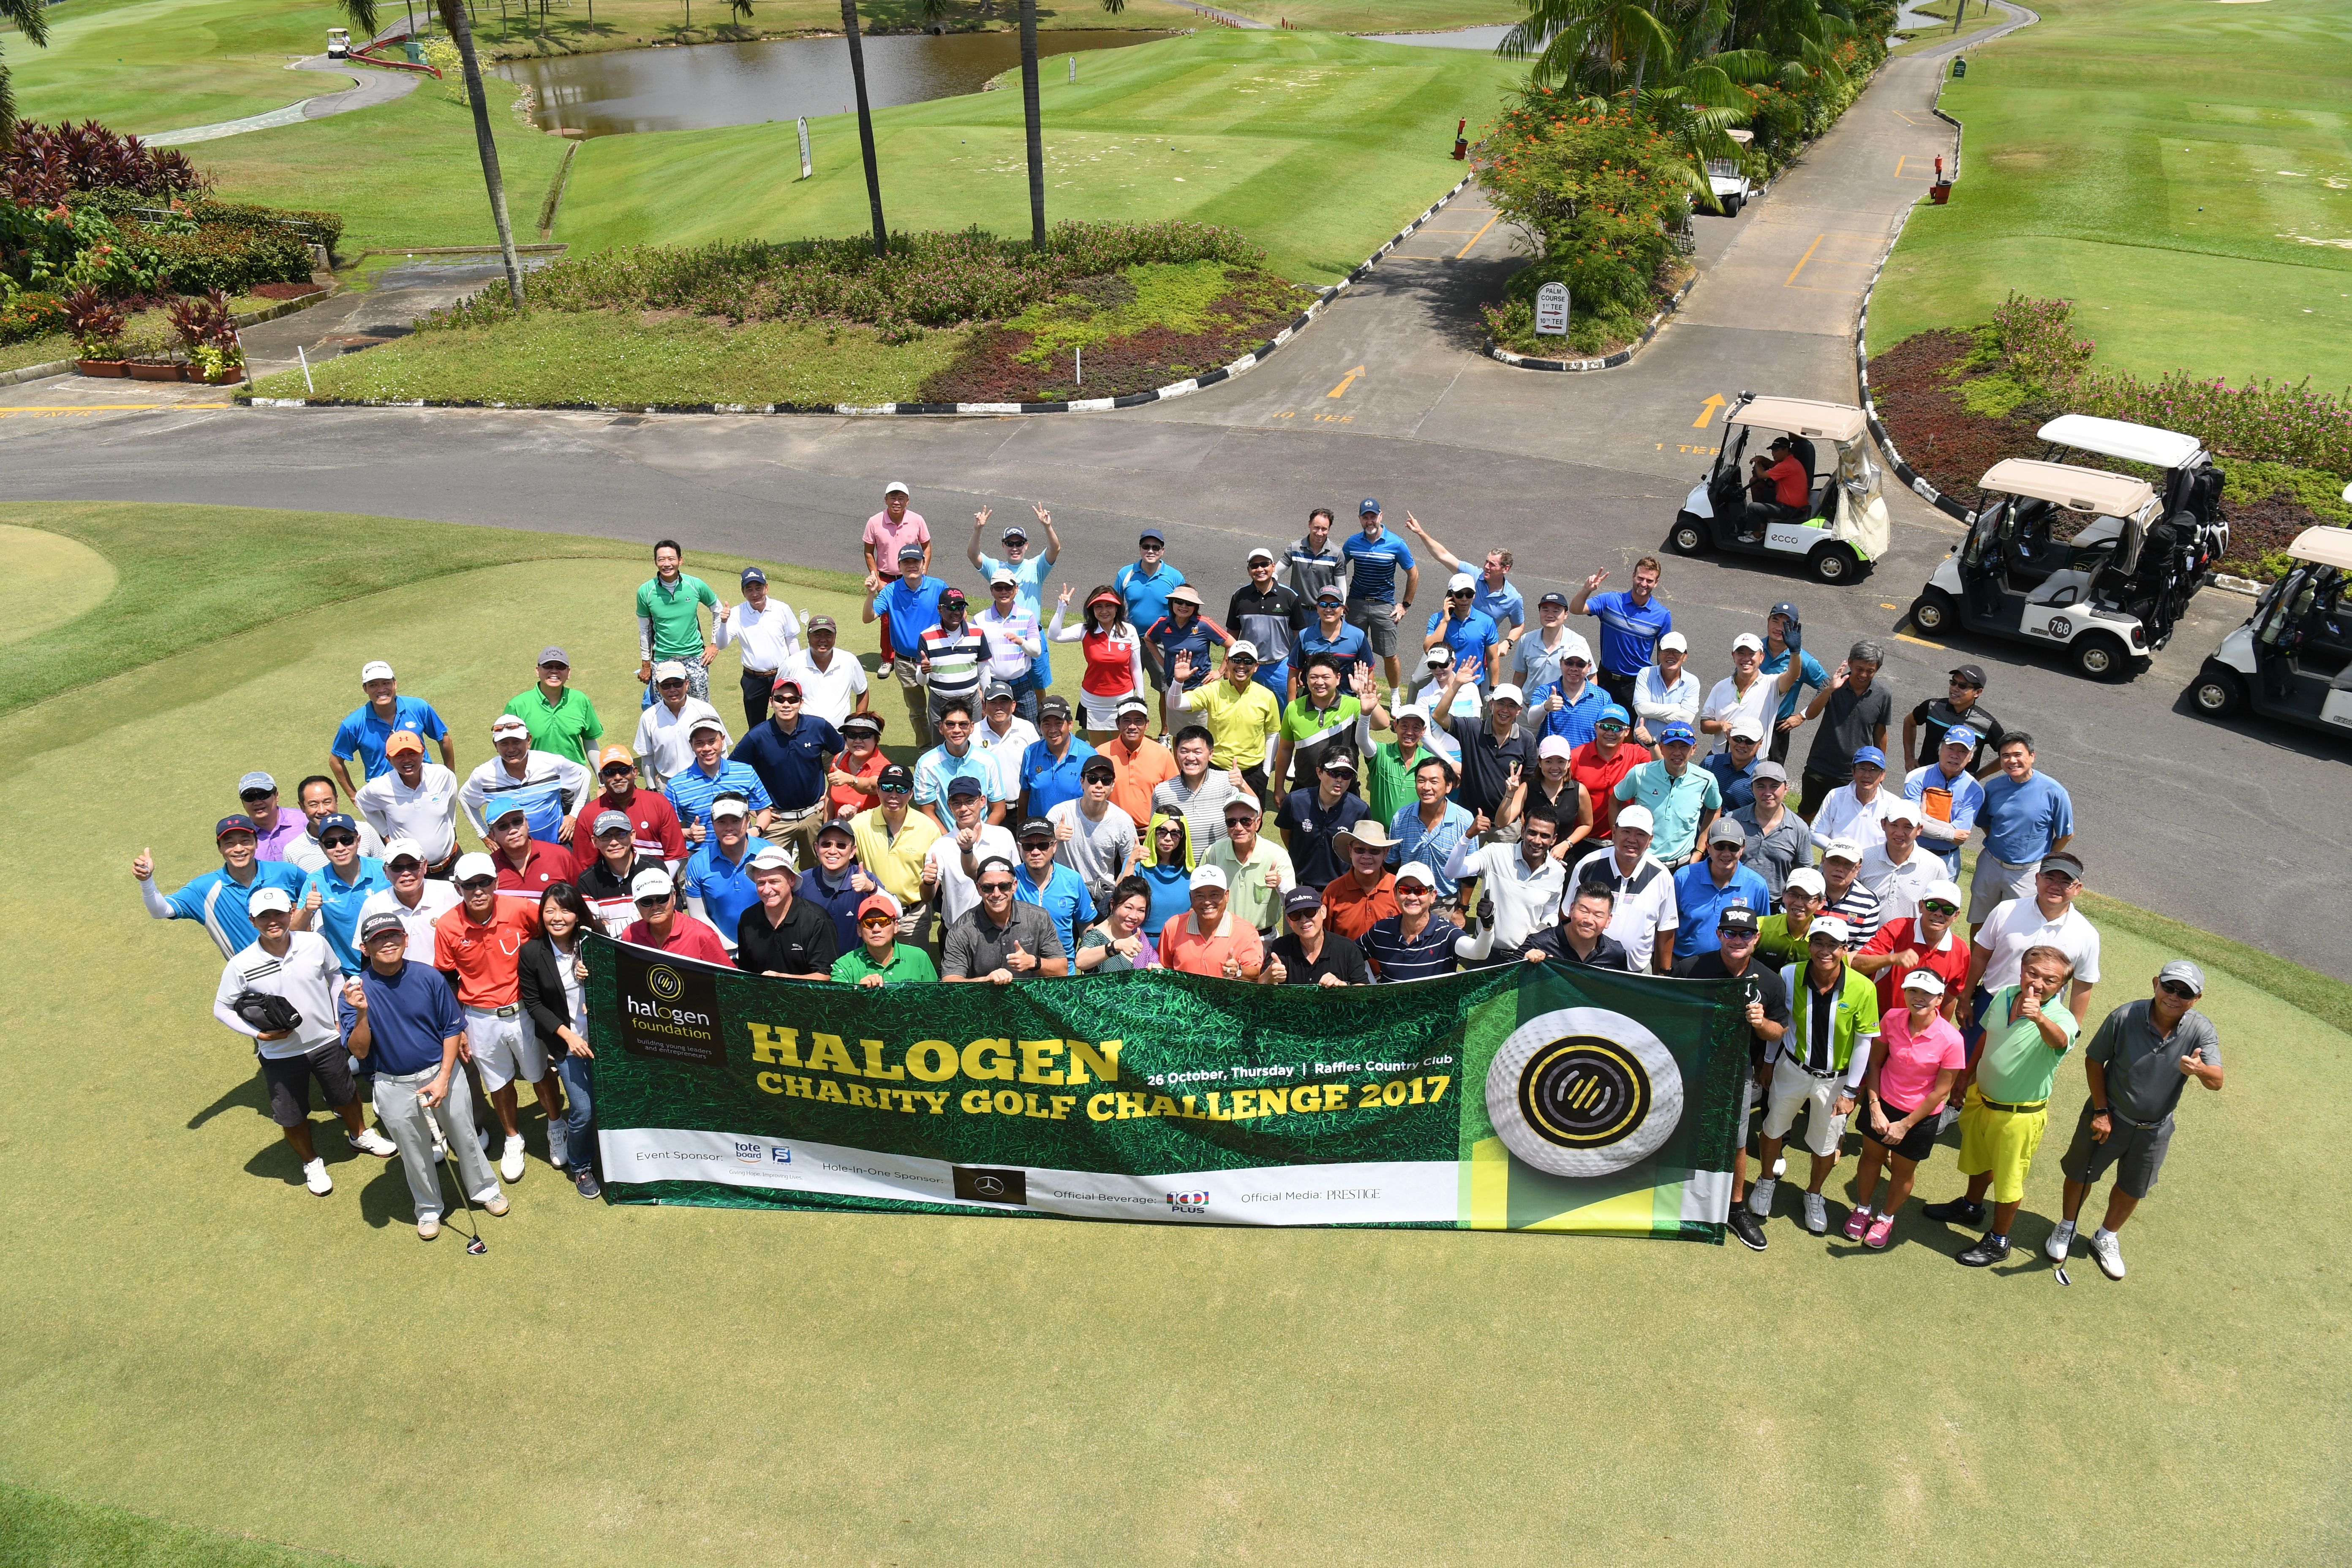 Halogen Foundation Singapore golfs for charity